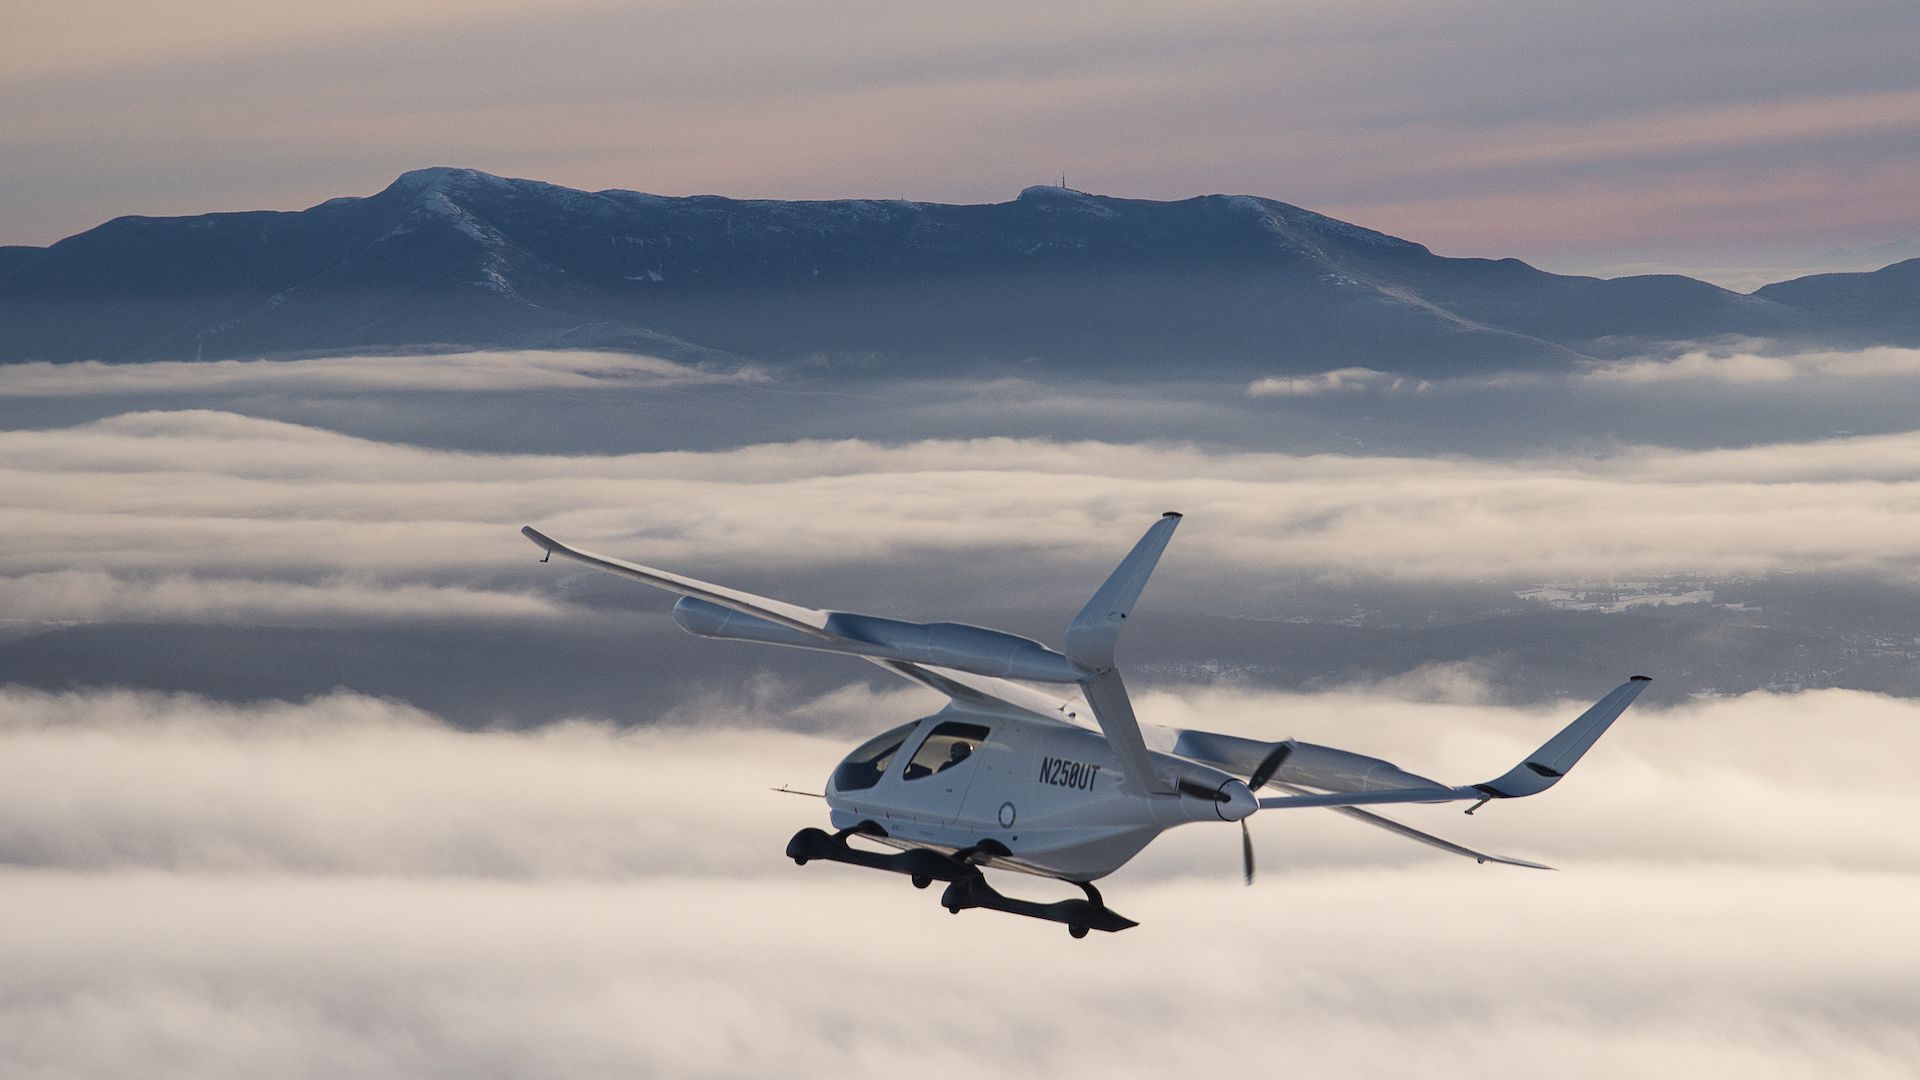 Beta Technologies' electric aircraft flying in front of a mountain.